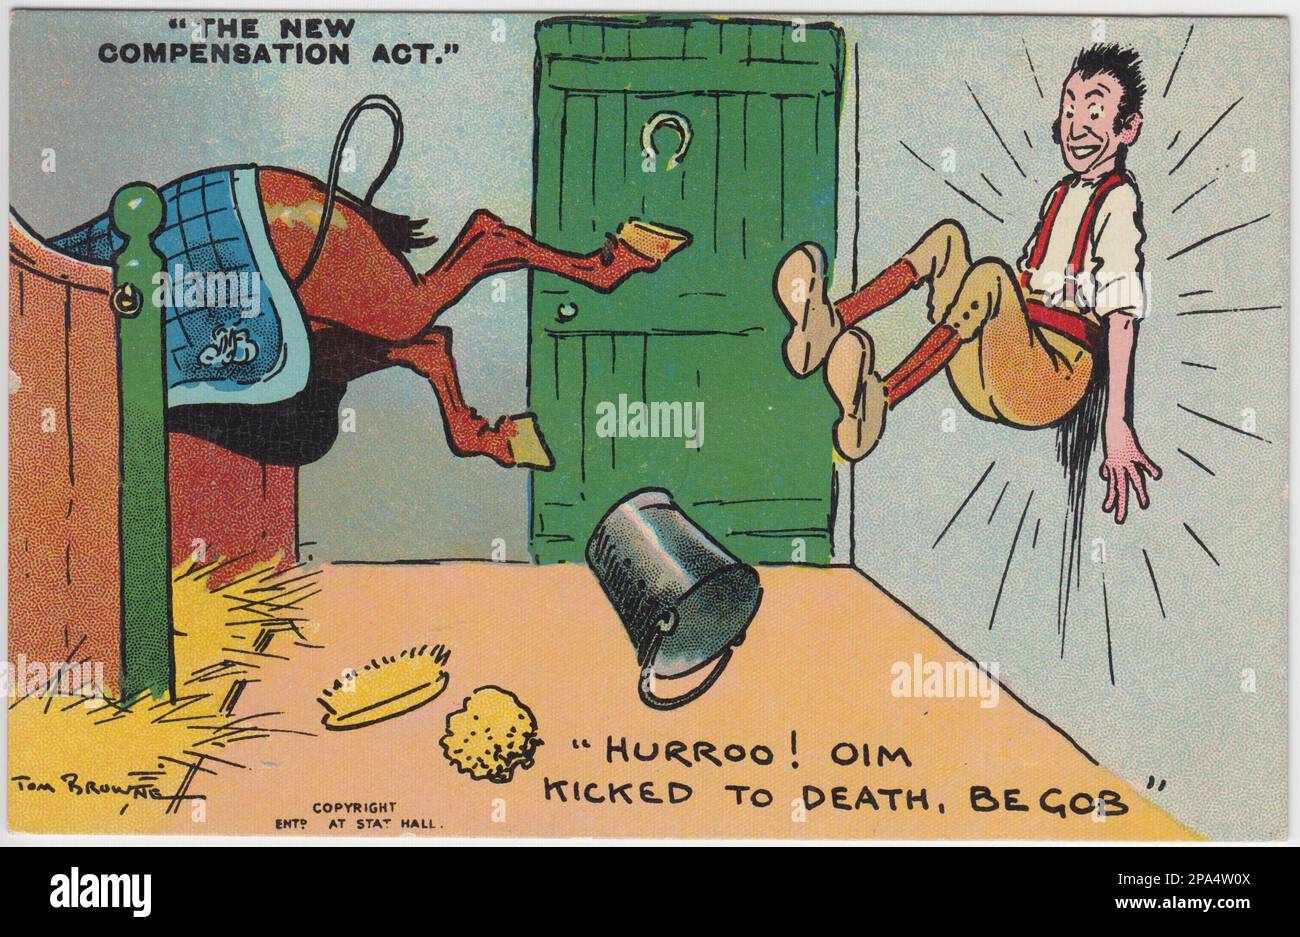 'The new Compensation Act', 'Hurroo! Oim kicked to death, be Gob': Cartoon by Tom Brown showing a stable hand or groom being kicked up against the wall by a horse. He is shown as celebrating the injury as the 1906 Workmen's Compensation Act would give him the legal right to financial compensation. He is also speaking in a cod Irish accent Stock Photo